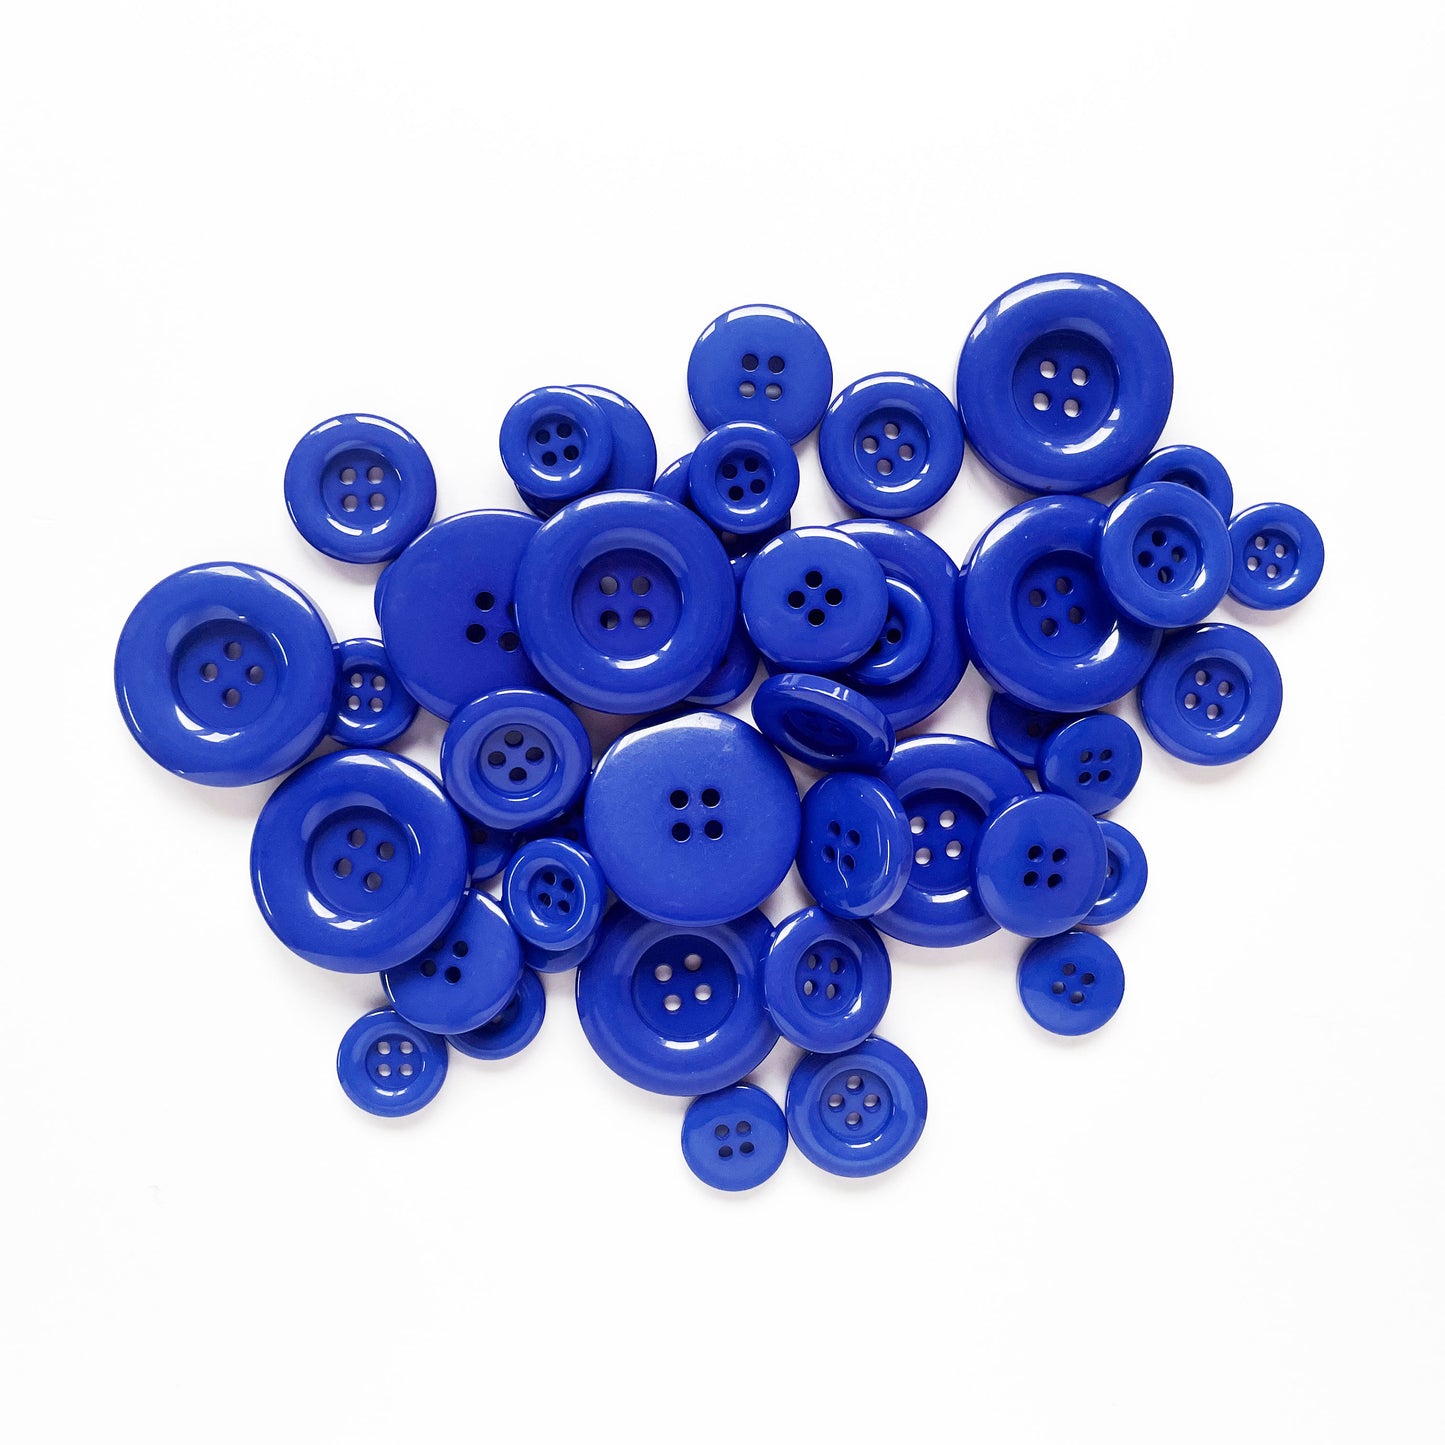 Deluxe resources for "Patchwork®" buttons blue buttons blue